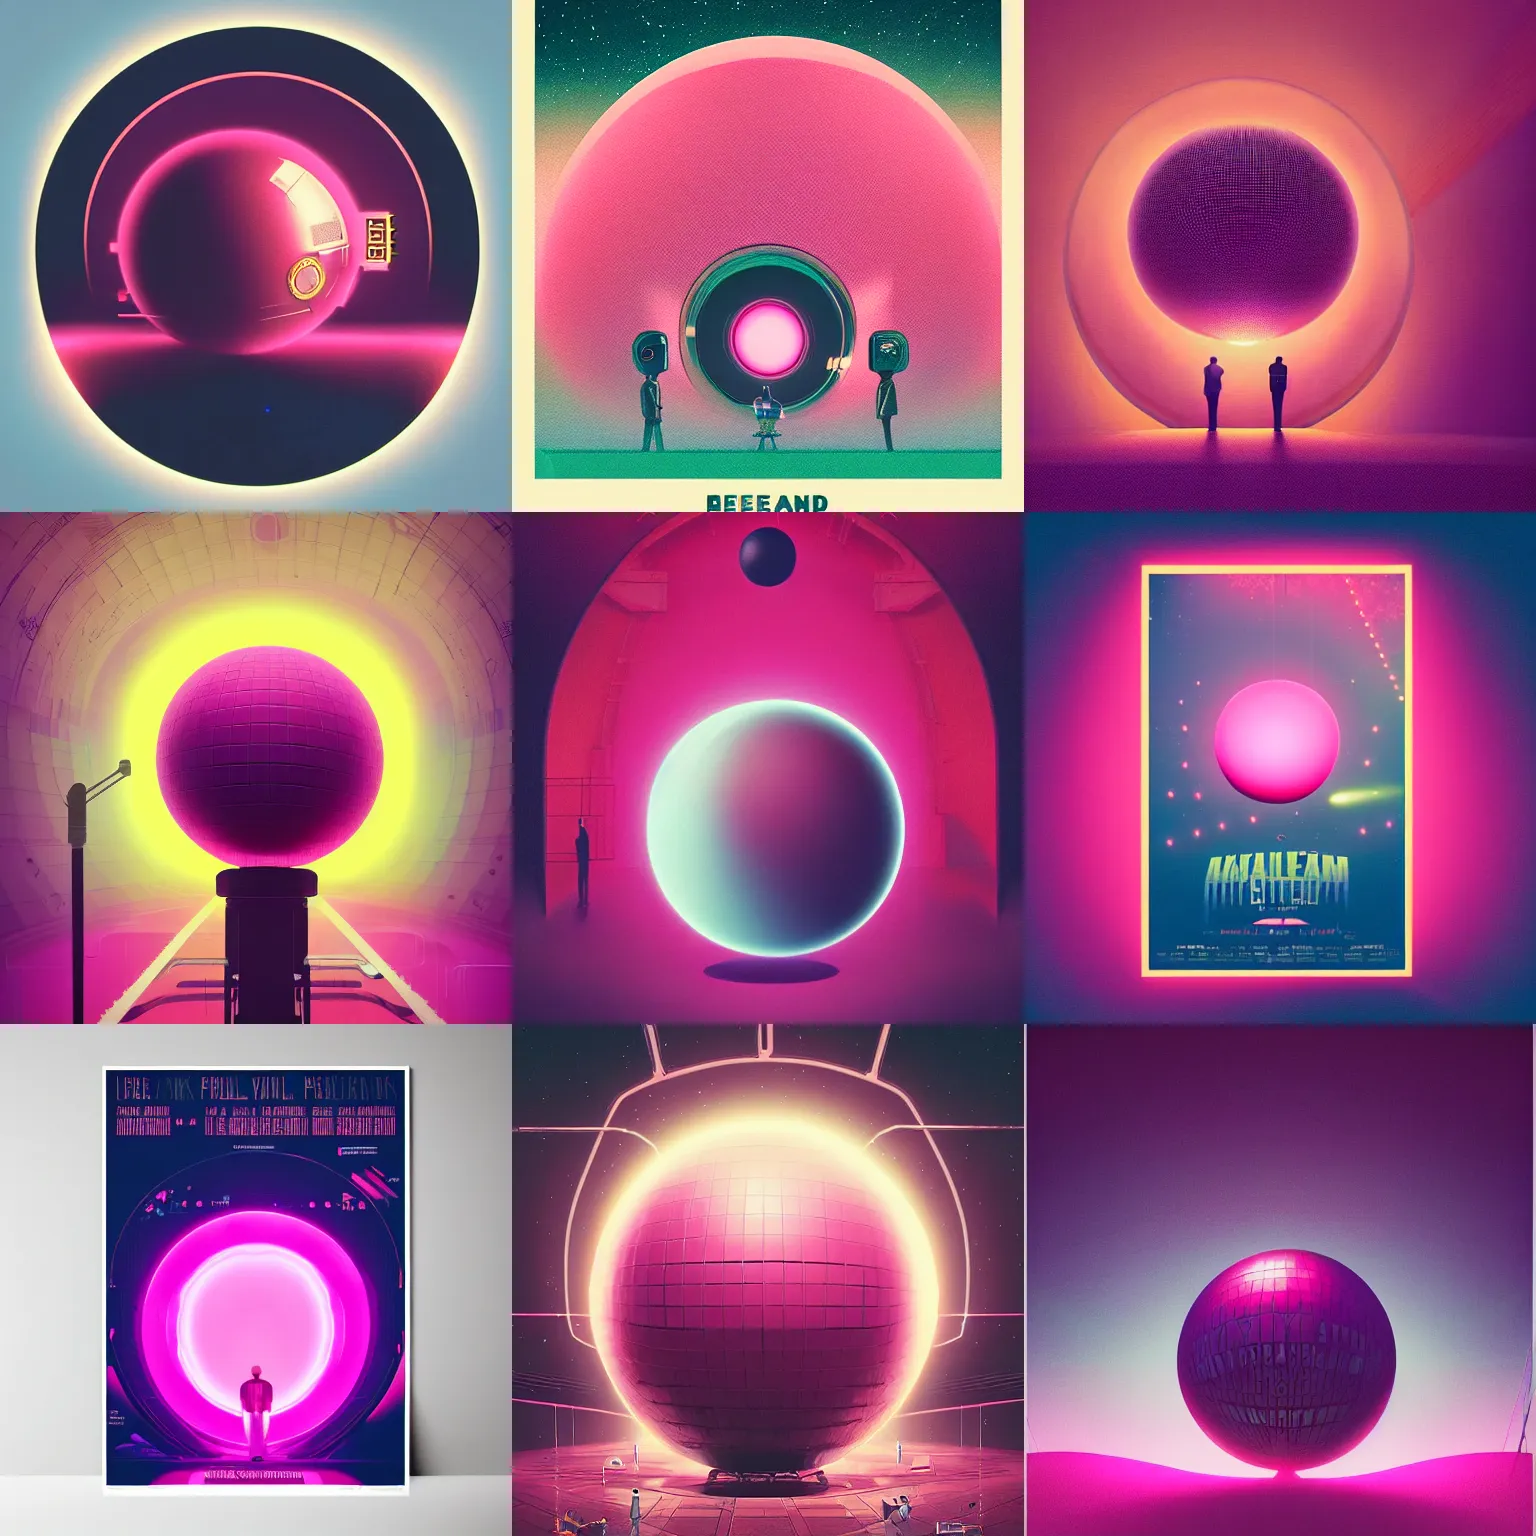 Prompt: a large pink ball with a spotlight in it, an album cover by Mike Beeple Winkelmann, pexels, retrofuturism, concert poster, poster art, greeble